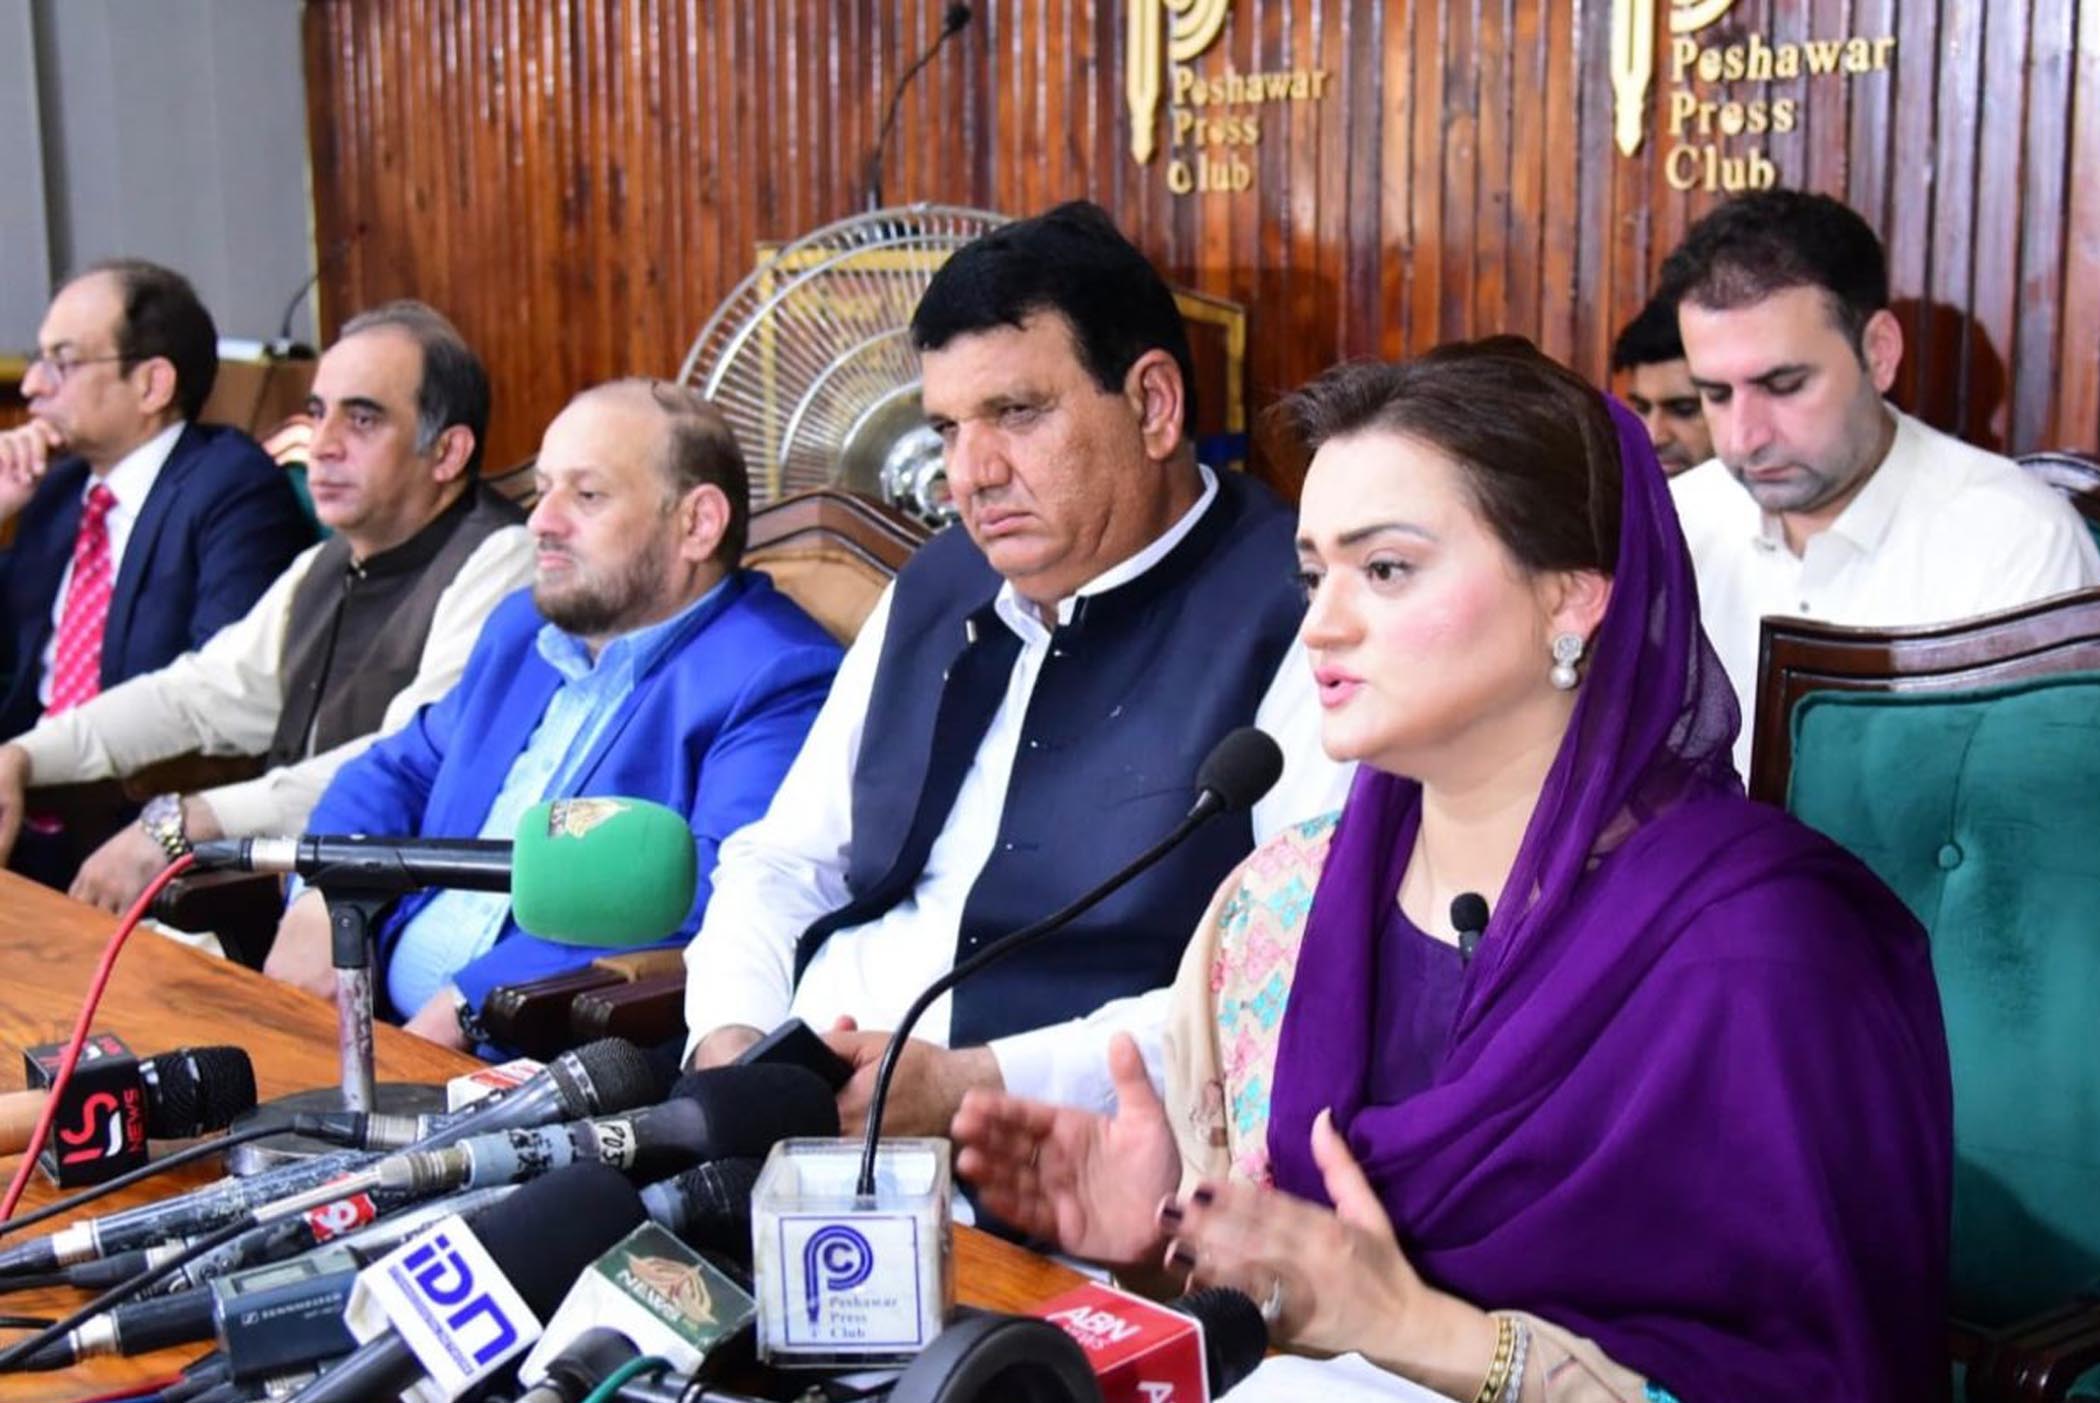 With unearthing of anti-state conspiracies, 'power hungry' PTI chief stands fully exposed: Marriyum